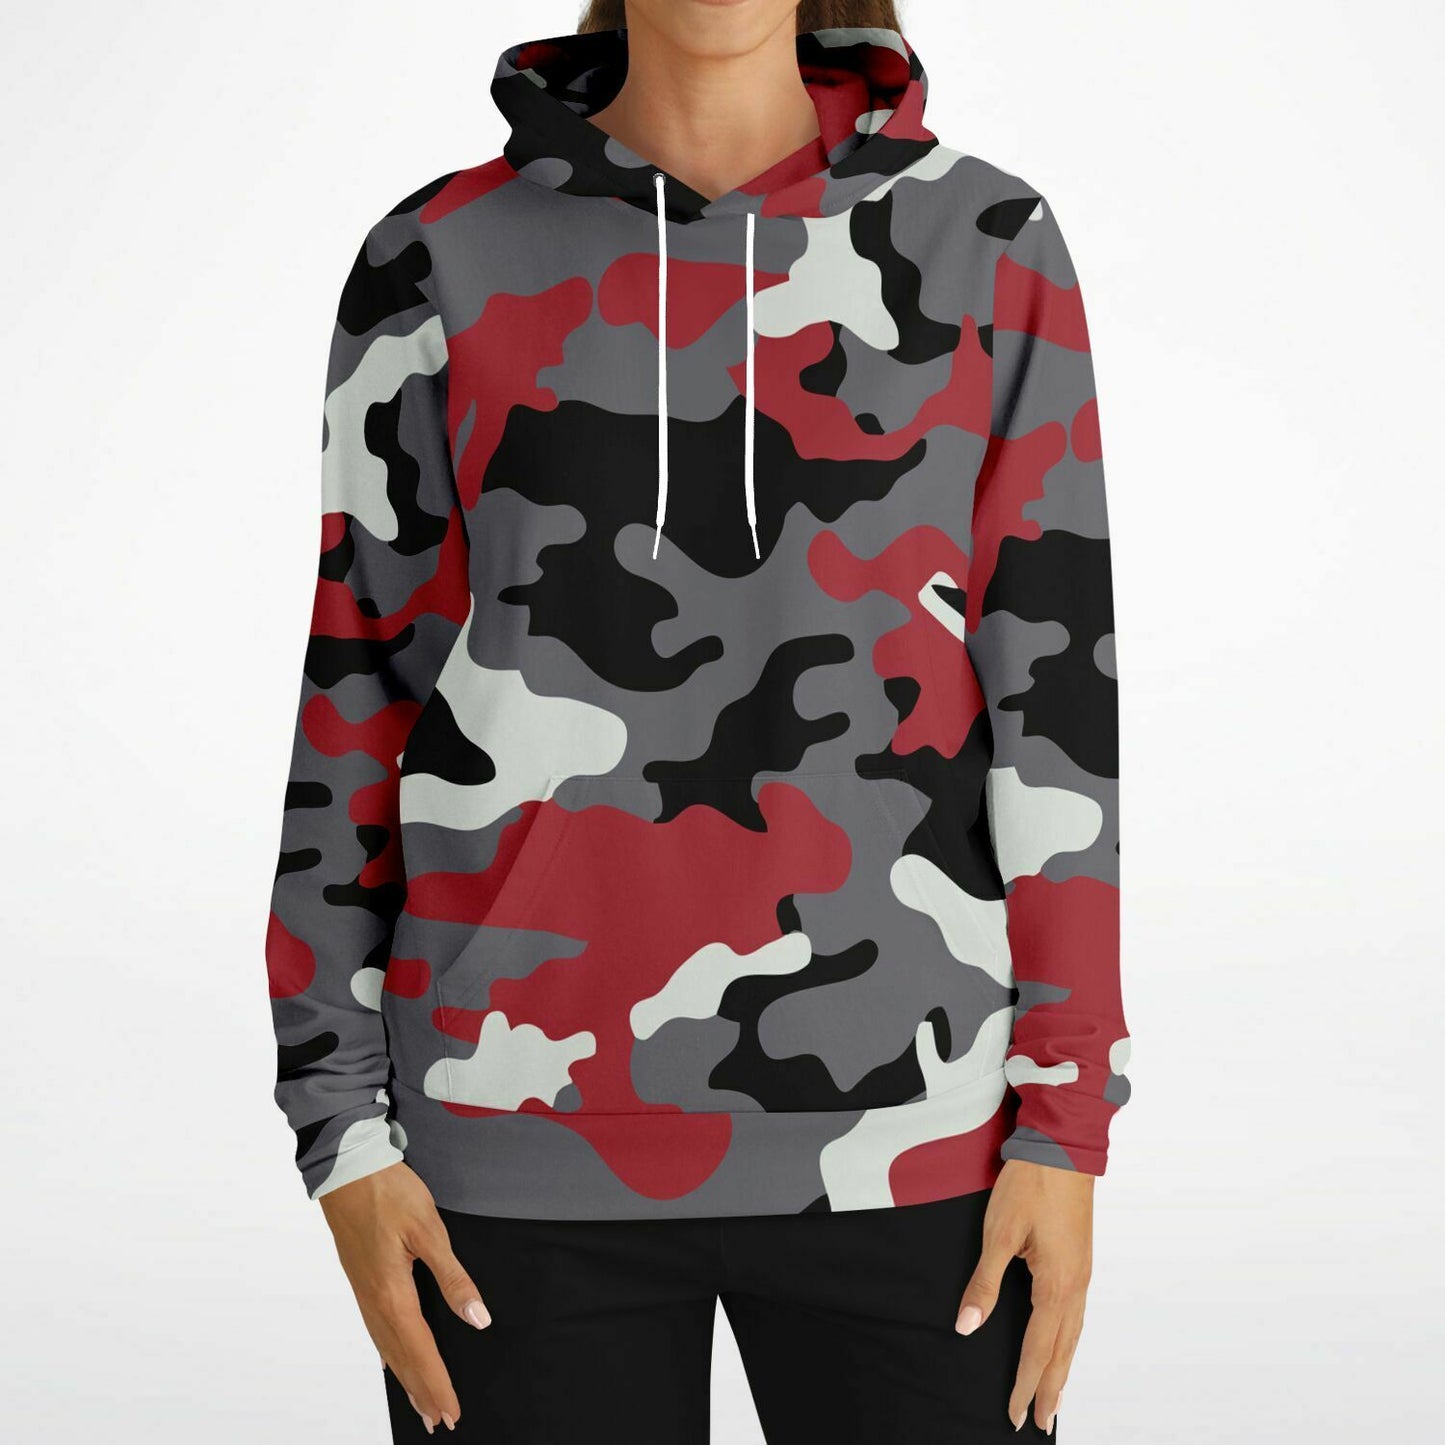 Red Grey Black Camo Hoodie, Camouflage Pullover Men Women Adult Aesthetic Graphic Cotton Hooded Sweatshirt with Pockets Starcove Fashion